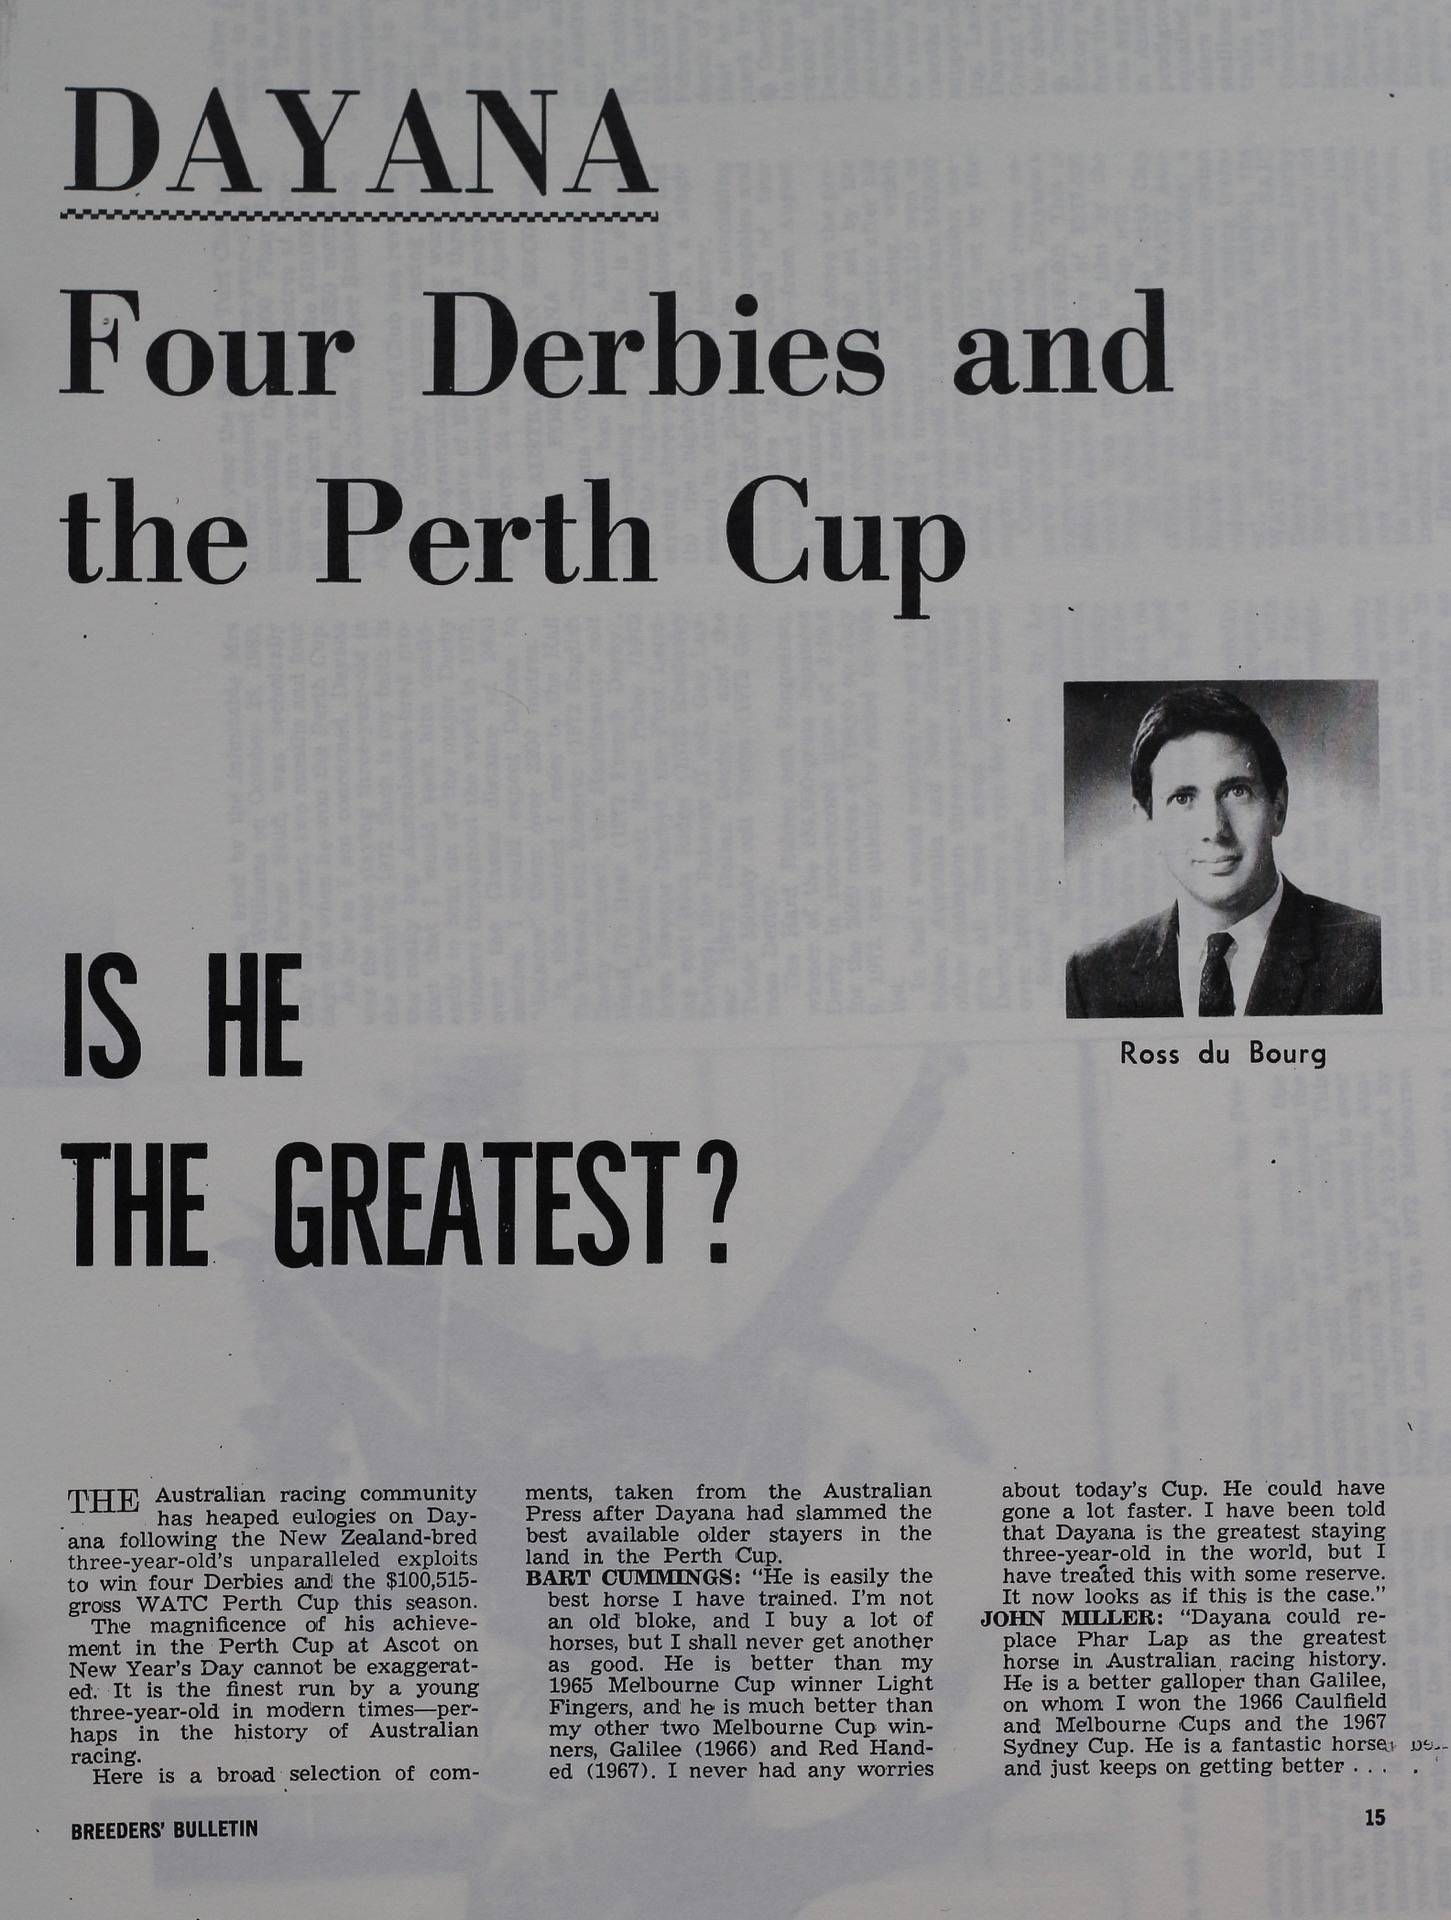 Dayana - Four derbies and the Perth cup